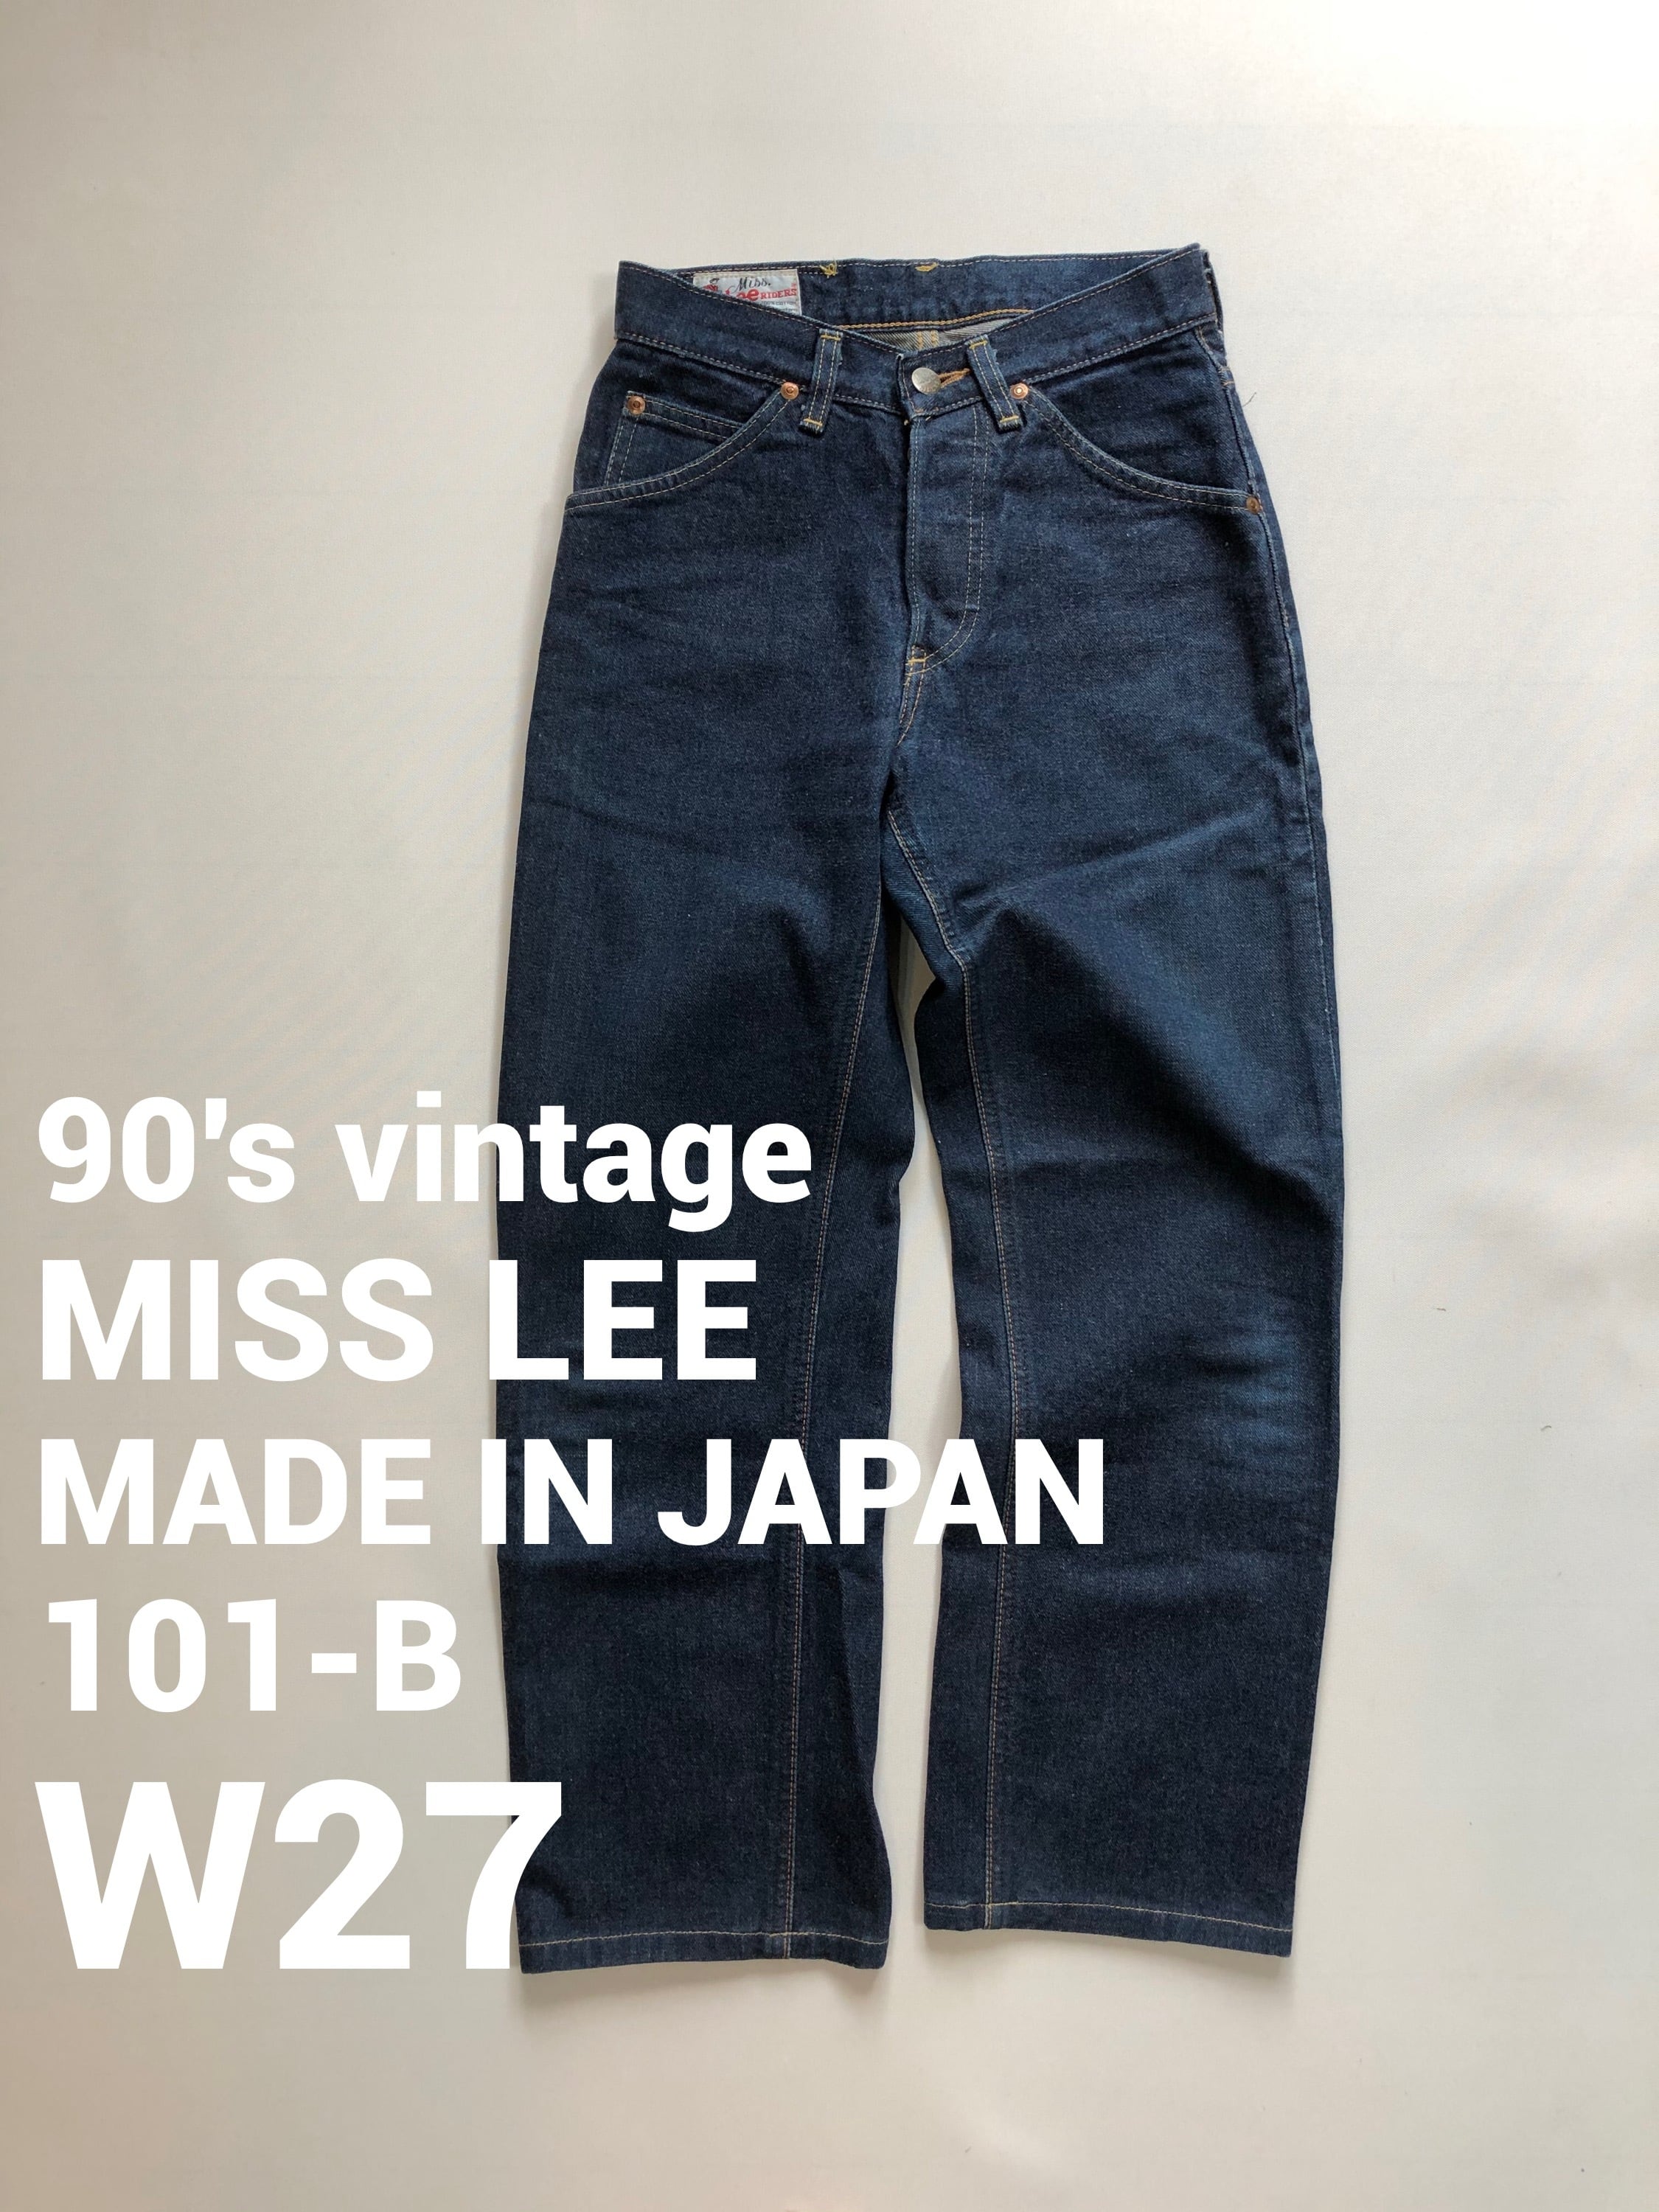 W27 miss Lee made in JAPAN リー 101-B 復刻 211 | ＳＥＣＯＮＤ HAND RED powered by BASE